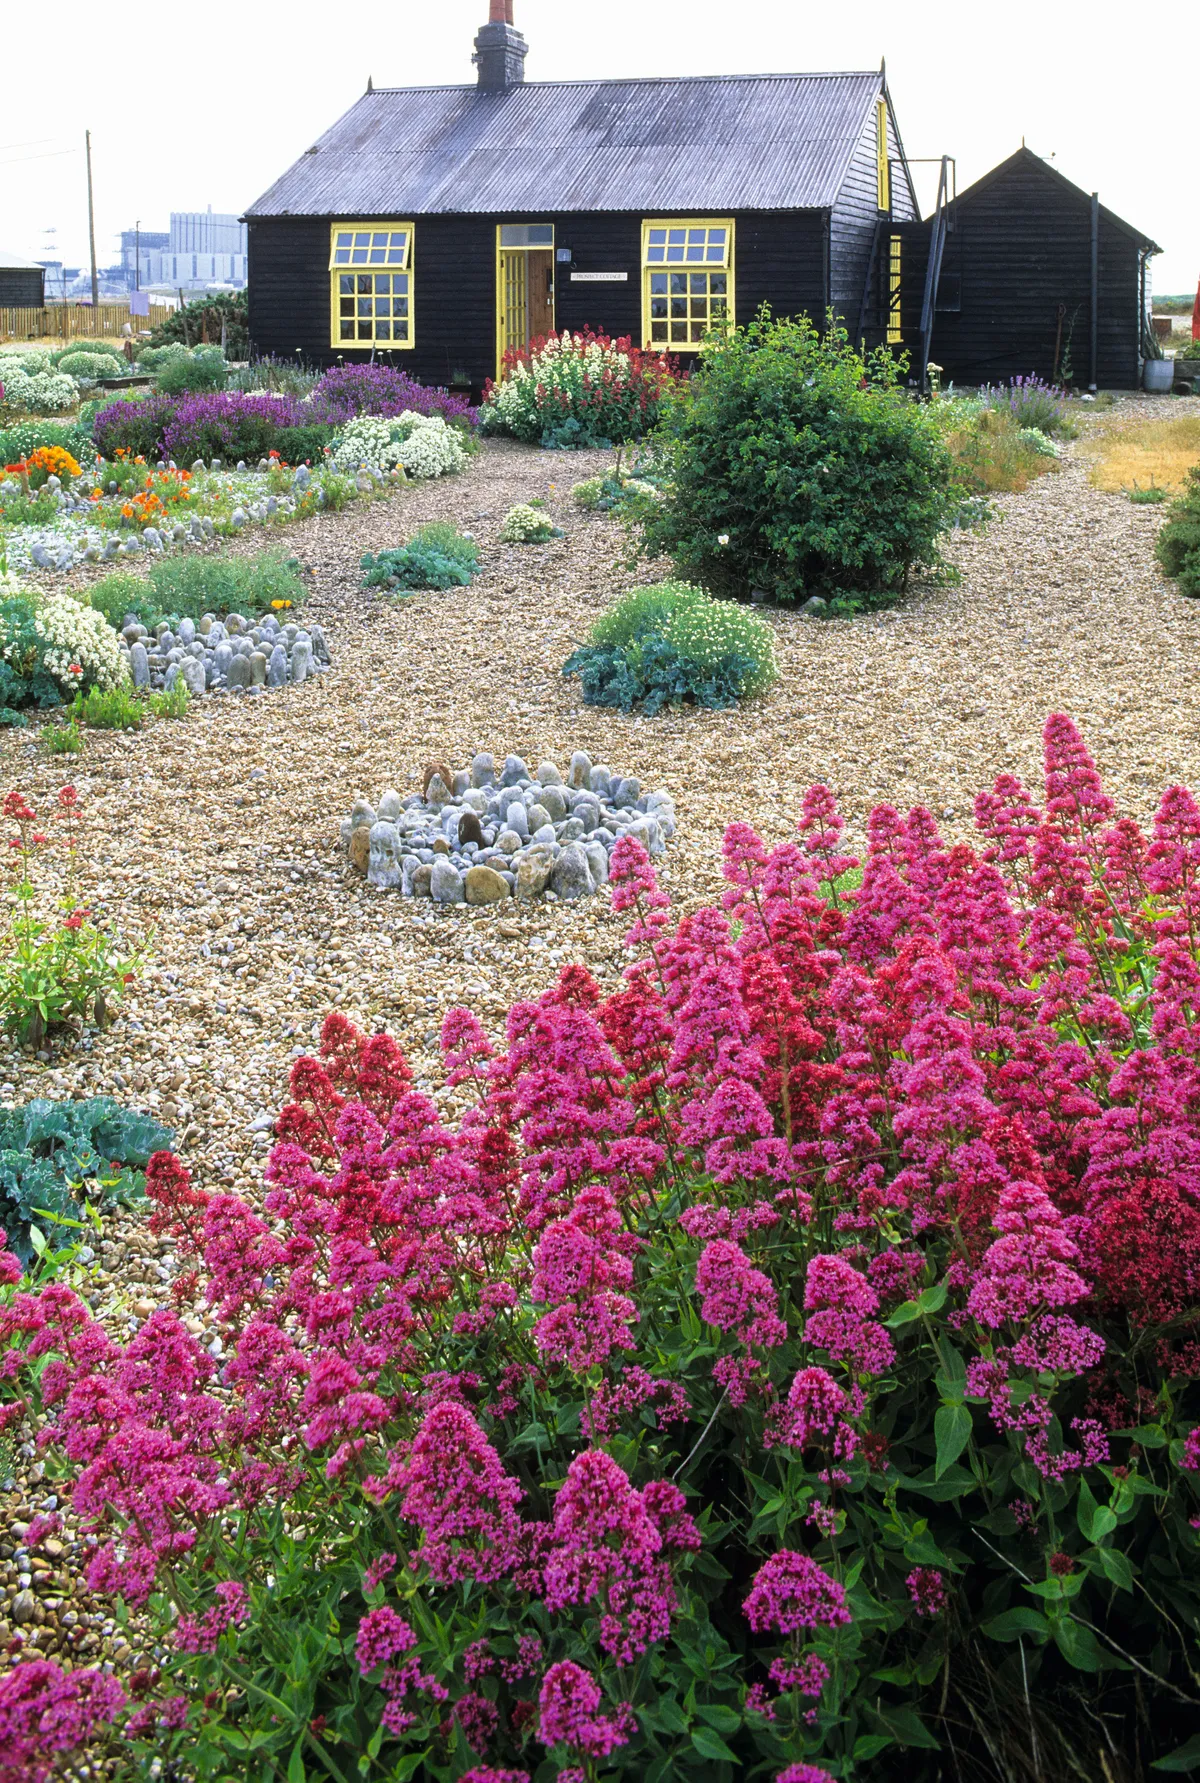 A shingle front garden with a small cottage in the background